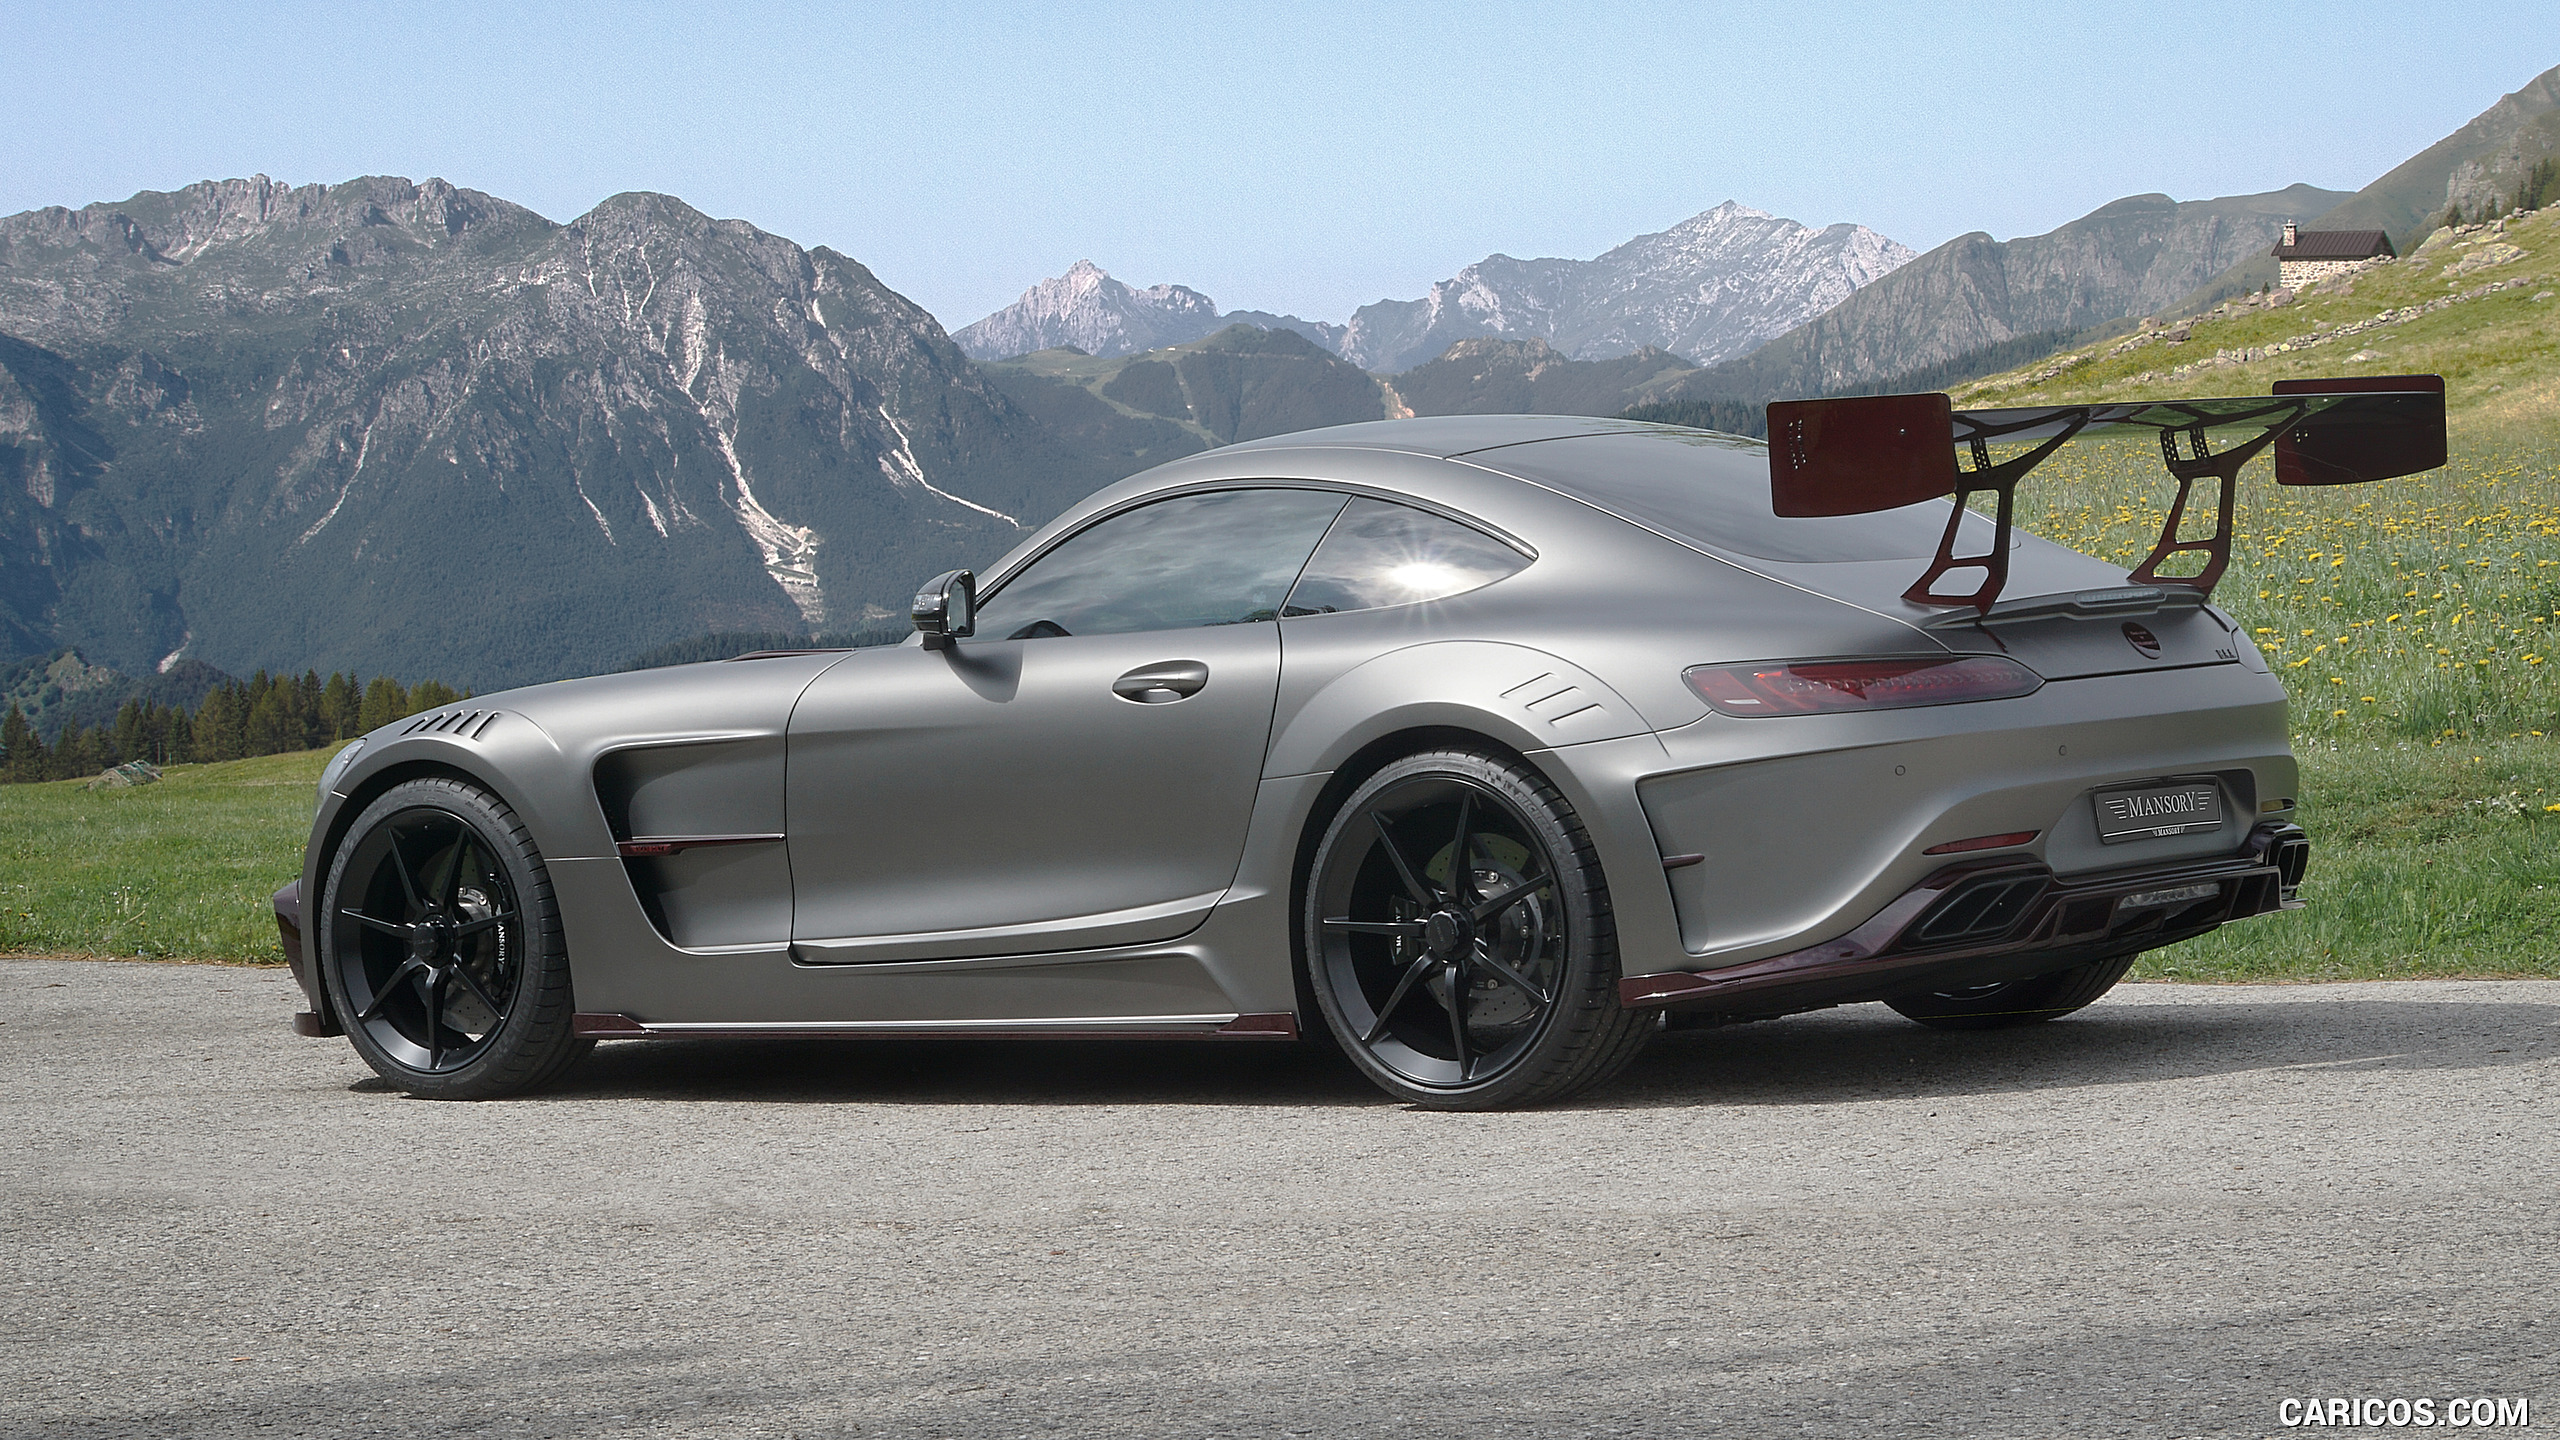 2016 MANSORY Mercedes-AMG GT S [One-Off] - Rear Three-Quarter, #3 of 7